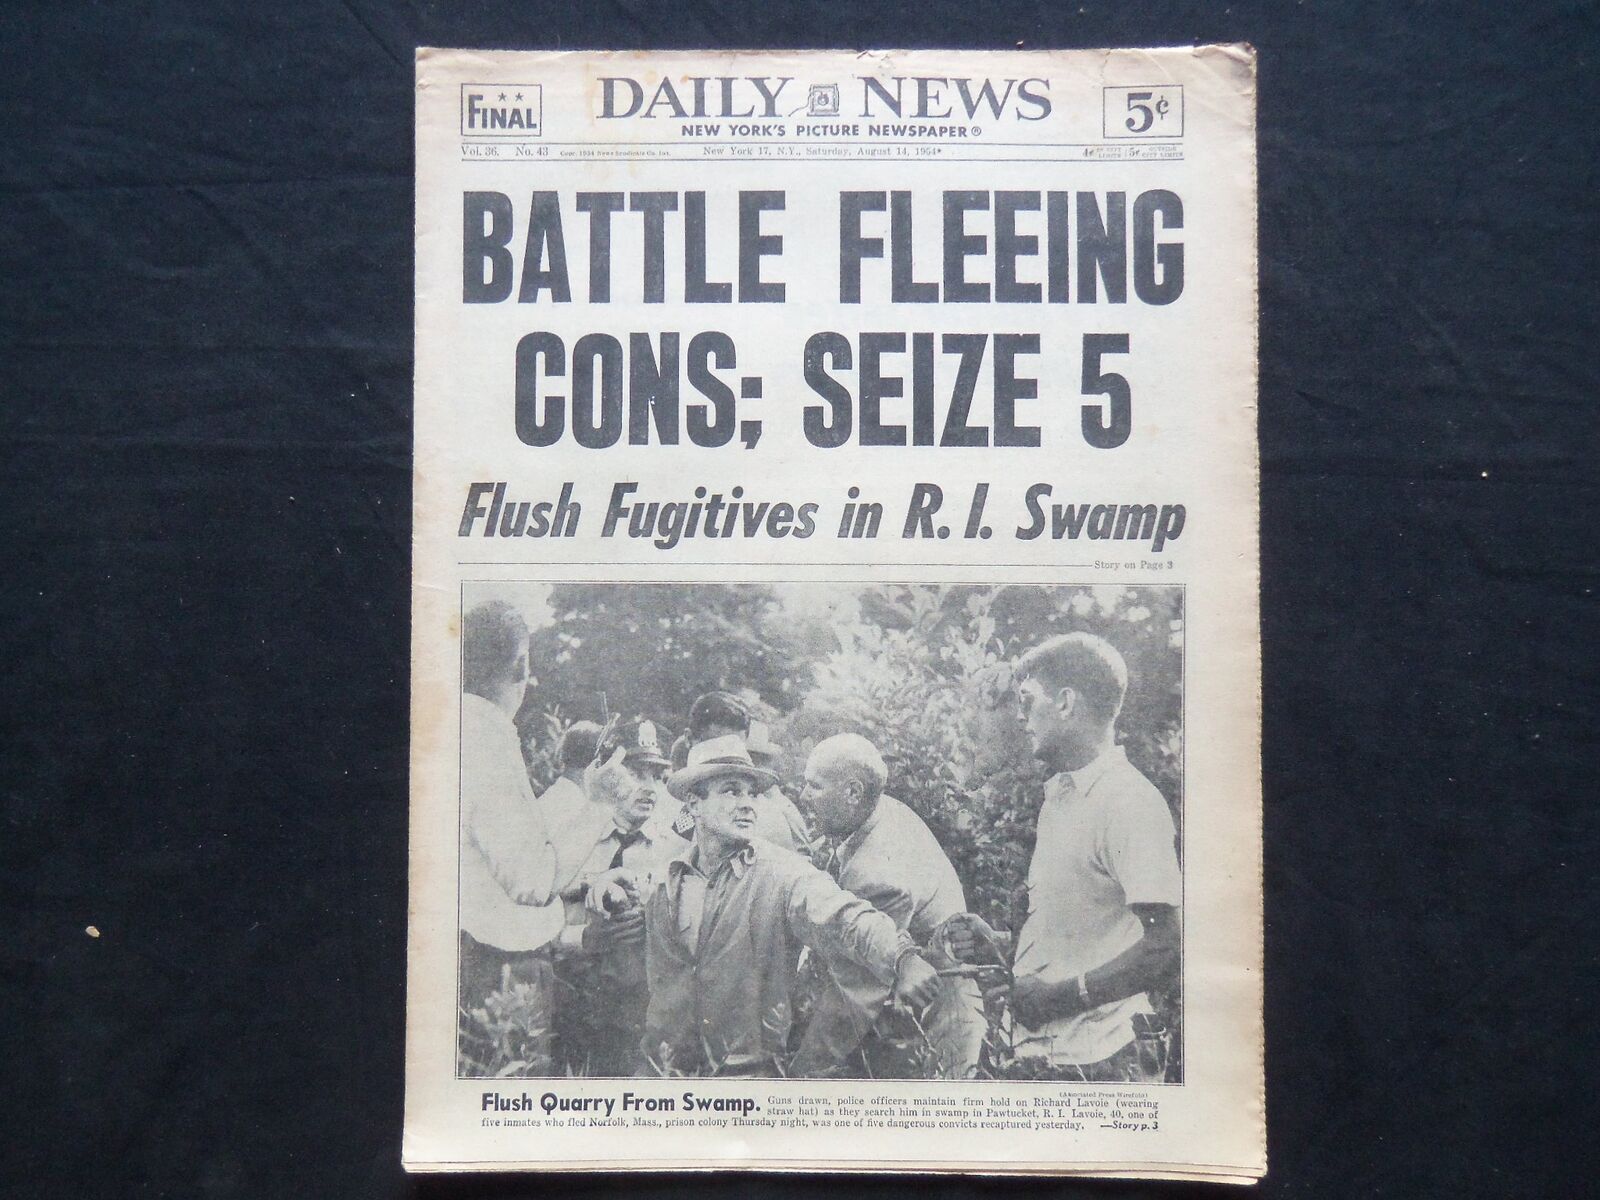 1954 AUGUST 14 NY DAILY NEWS NEWSPAPER - BATTLE FLEEING CONS; SEIZE 5 - NP 2516